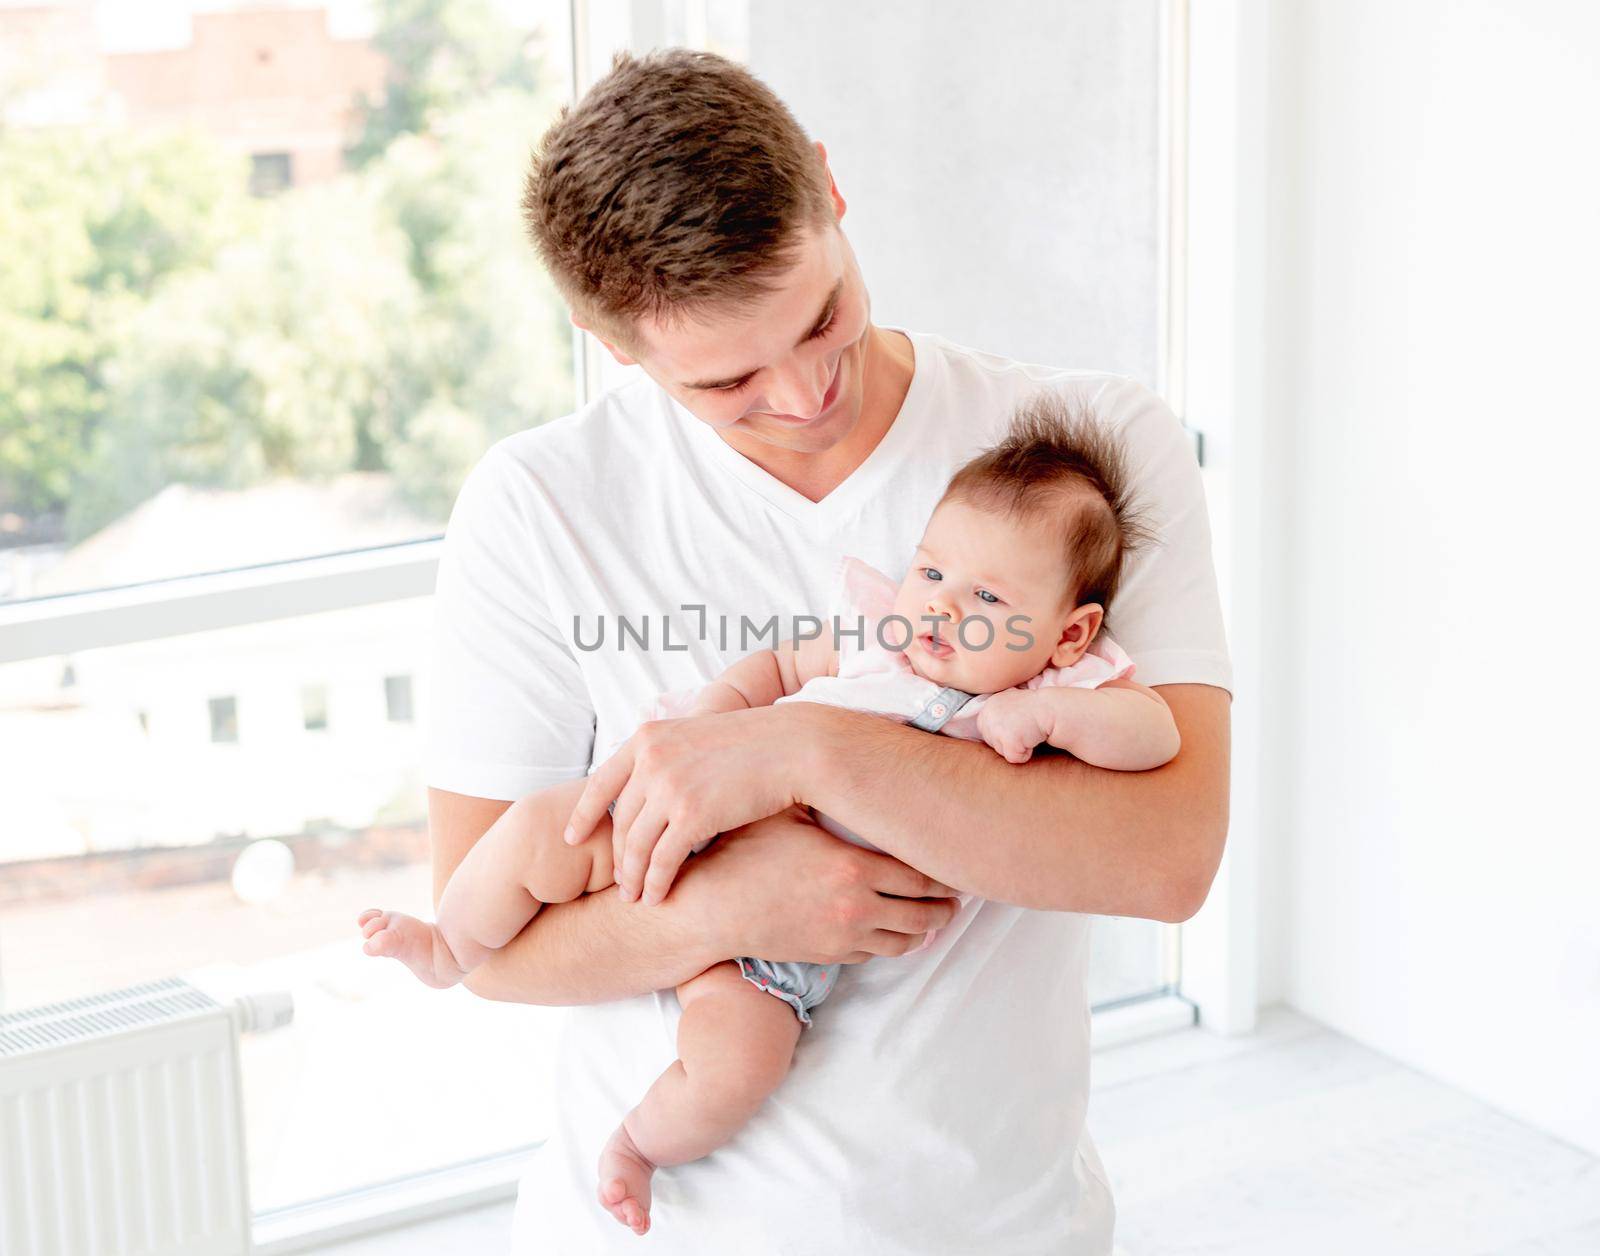 Father embracing infant by tan4ikk1